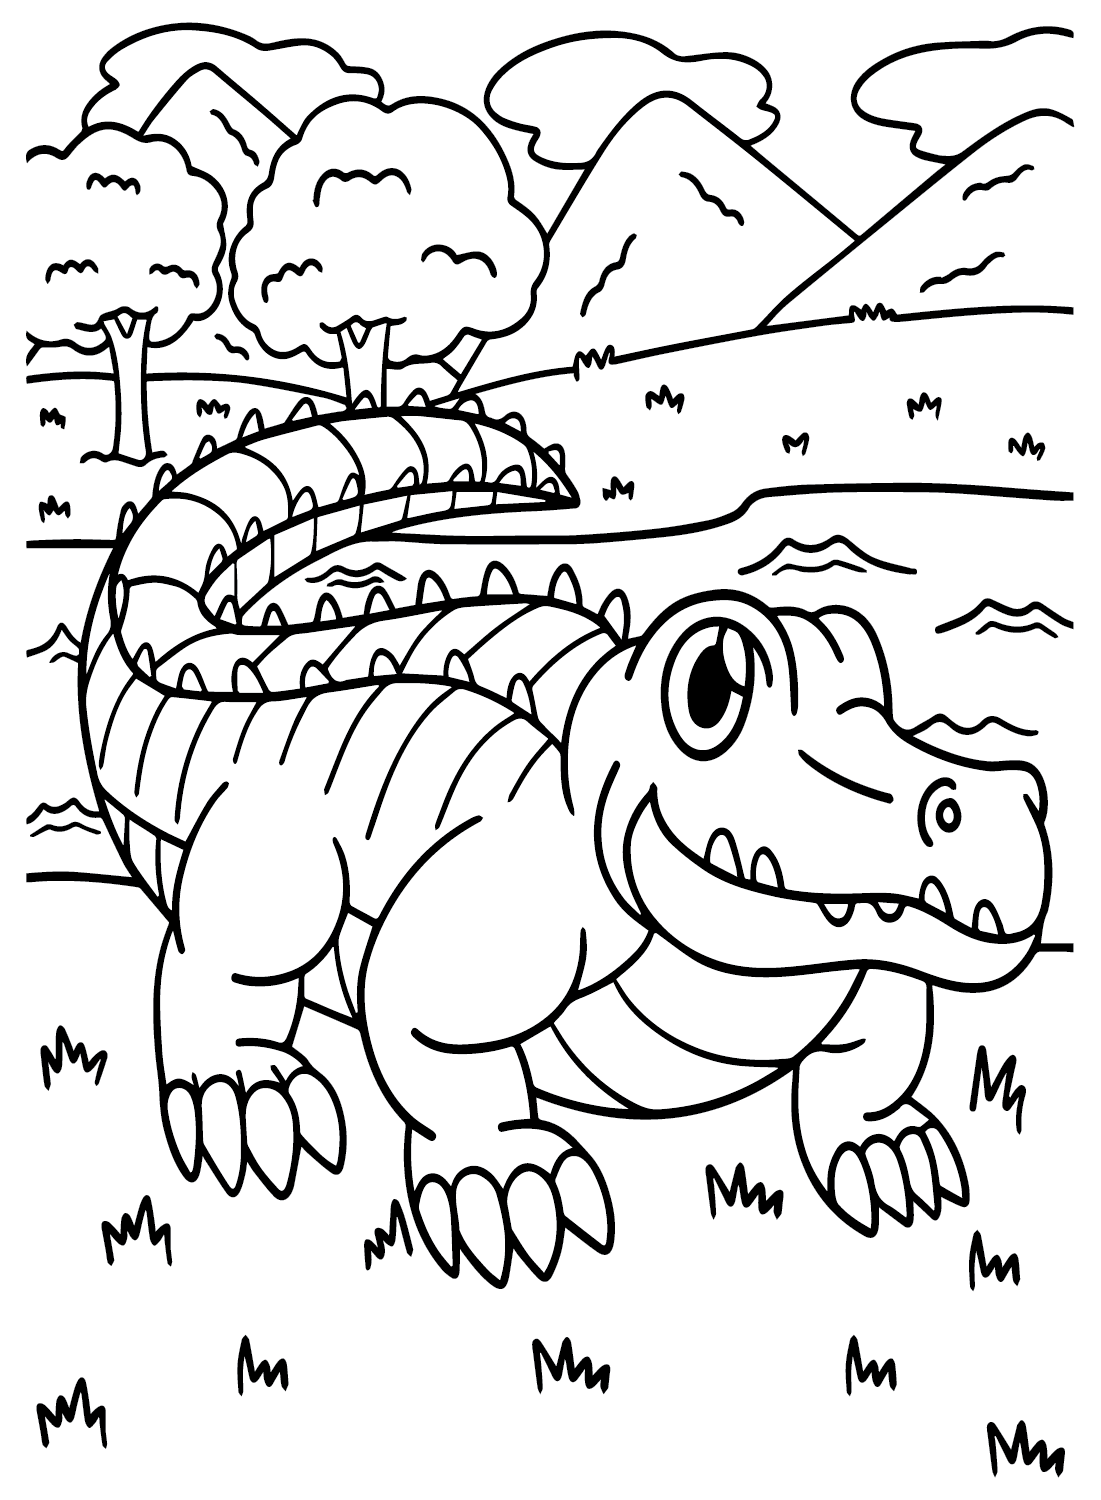 Vector The Crocodile Coloring Page - Free Printable Coloring Pages